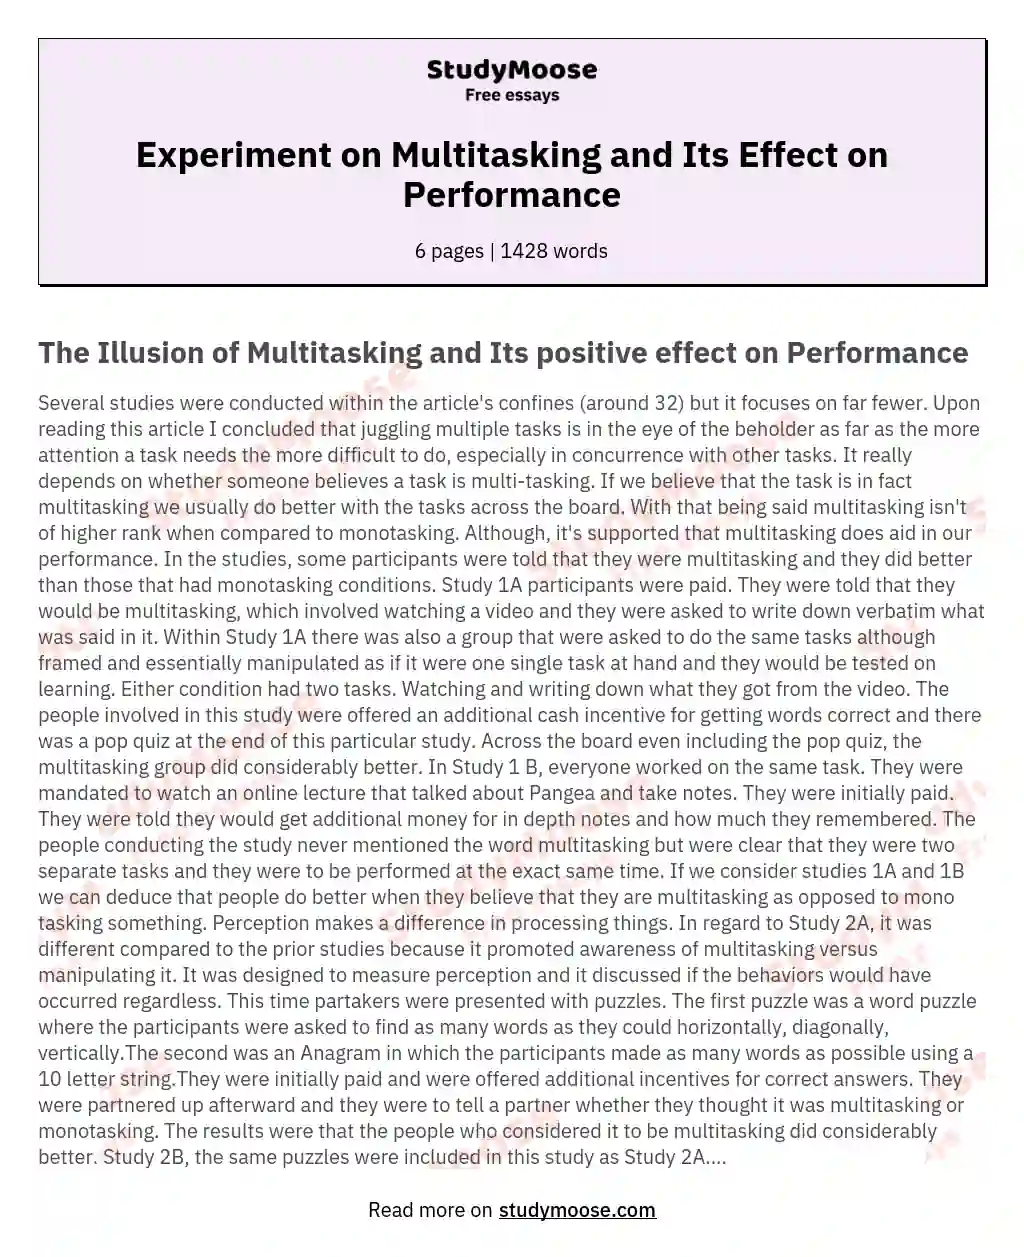 Experiment on Multitasking and Its Effect on Performance essay